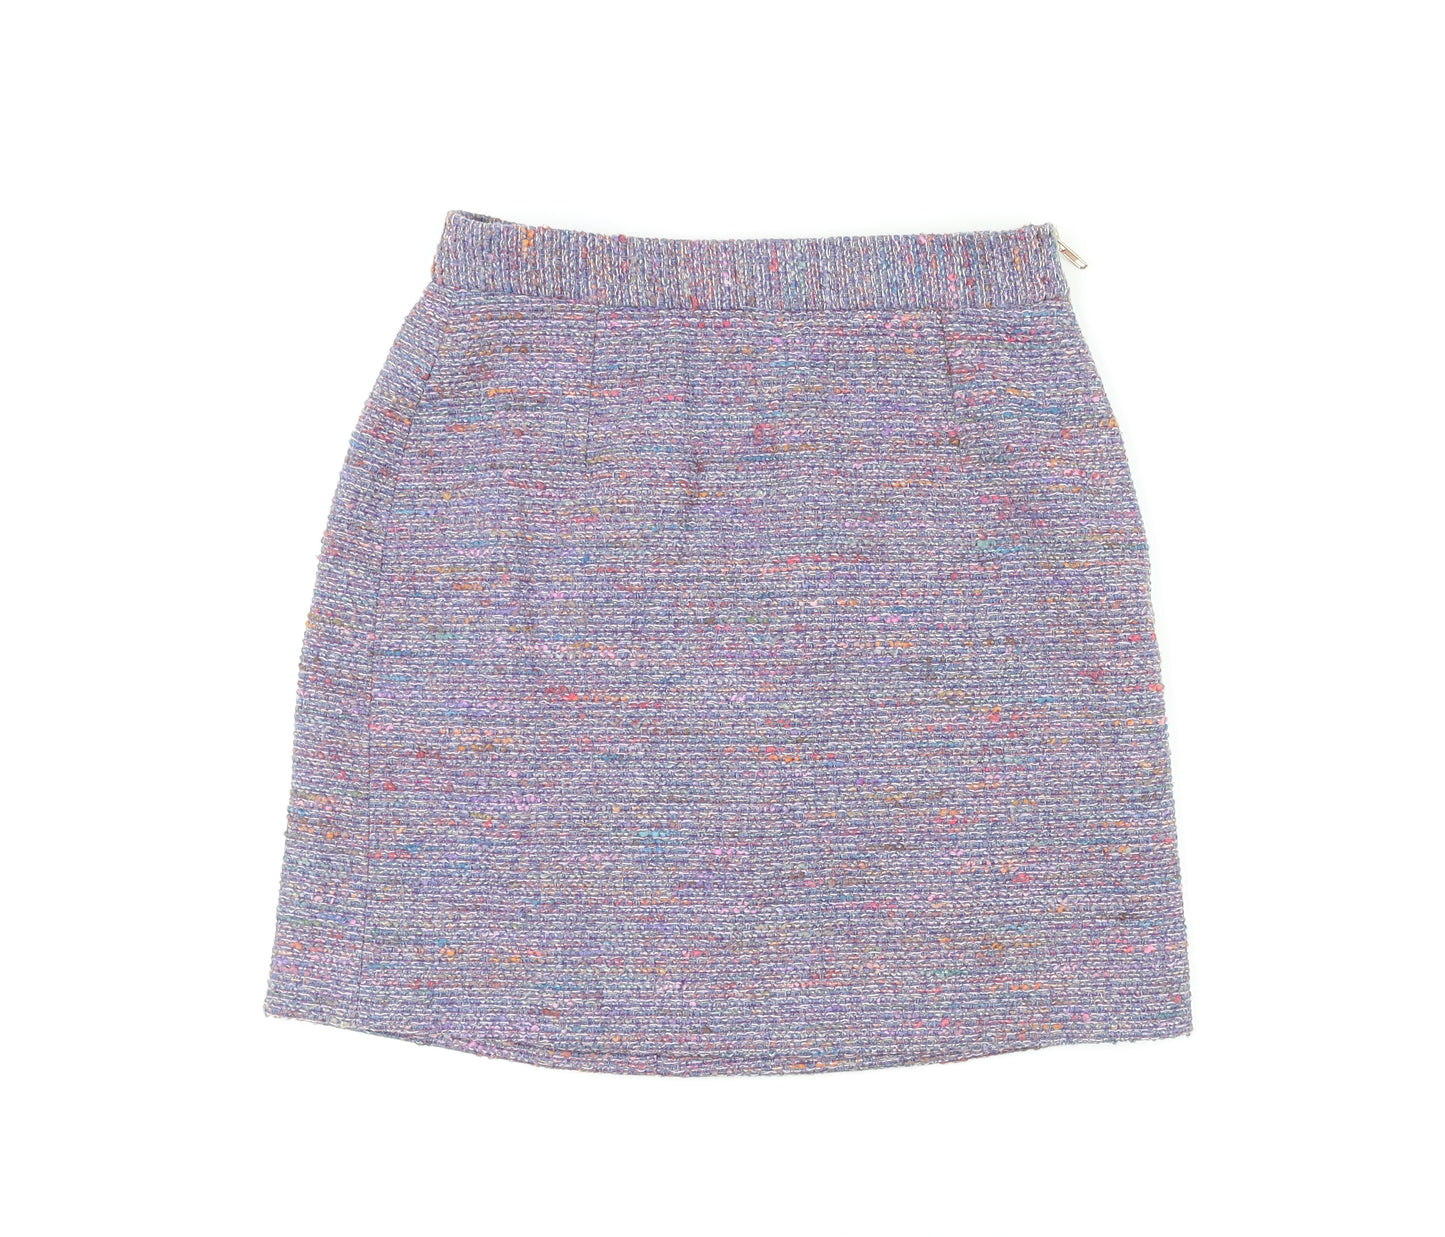 French Connection Womens Multicoloured Polyester A-Line Skirt Size 8 Zip